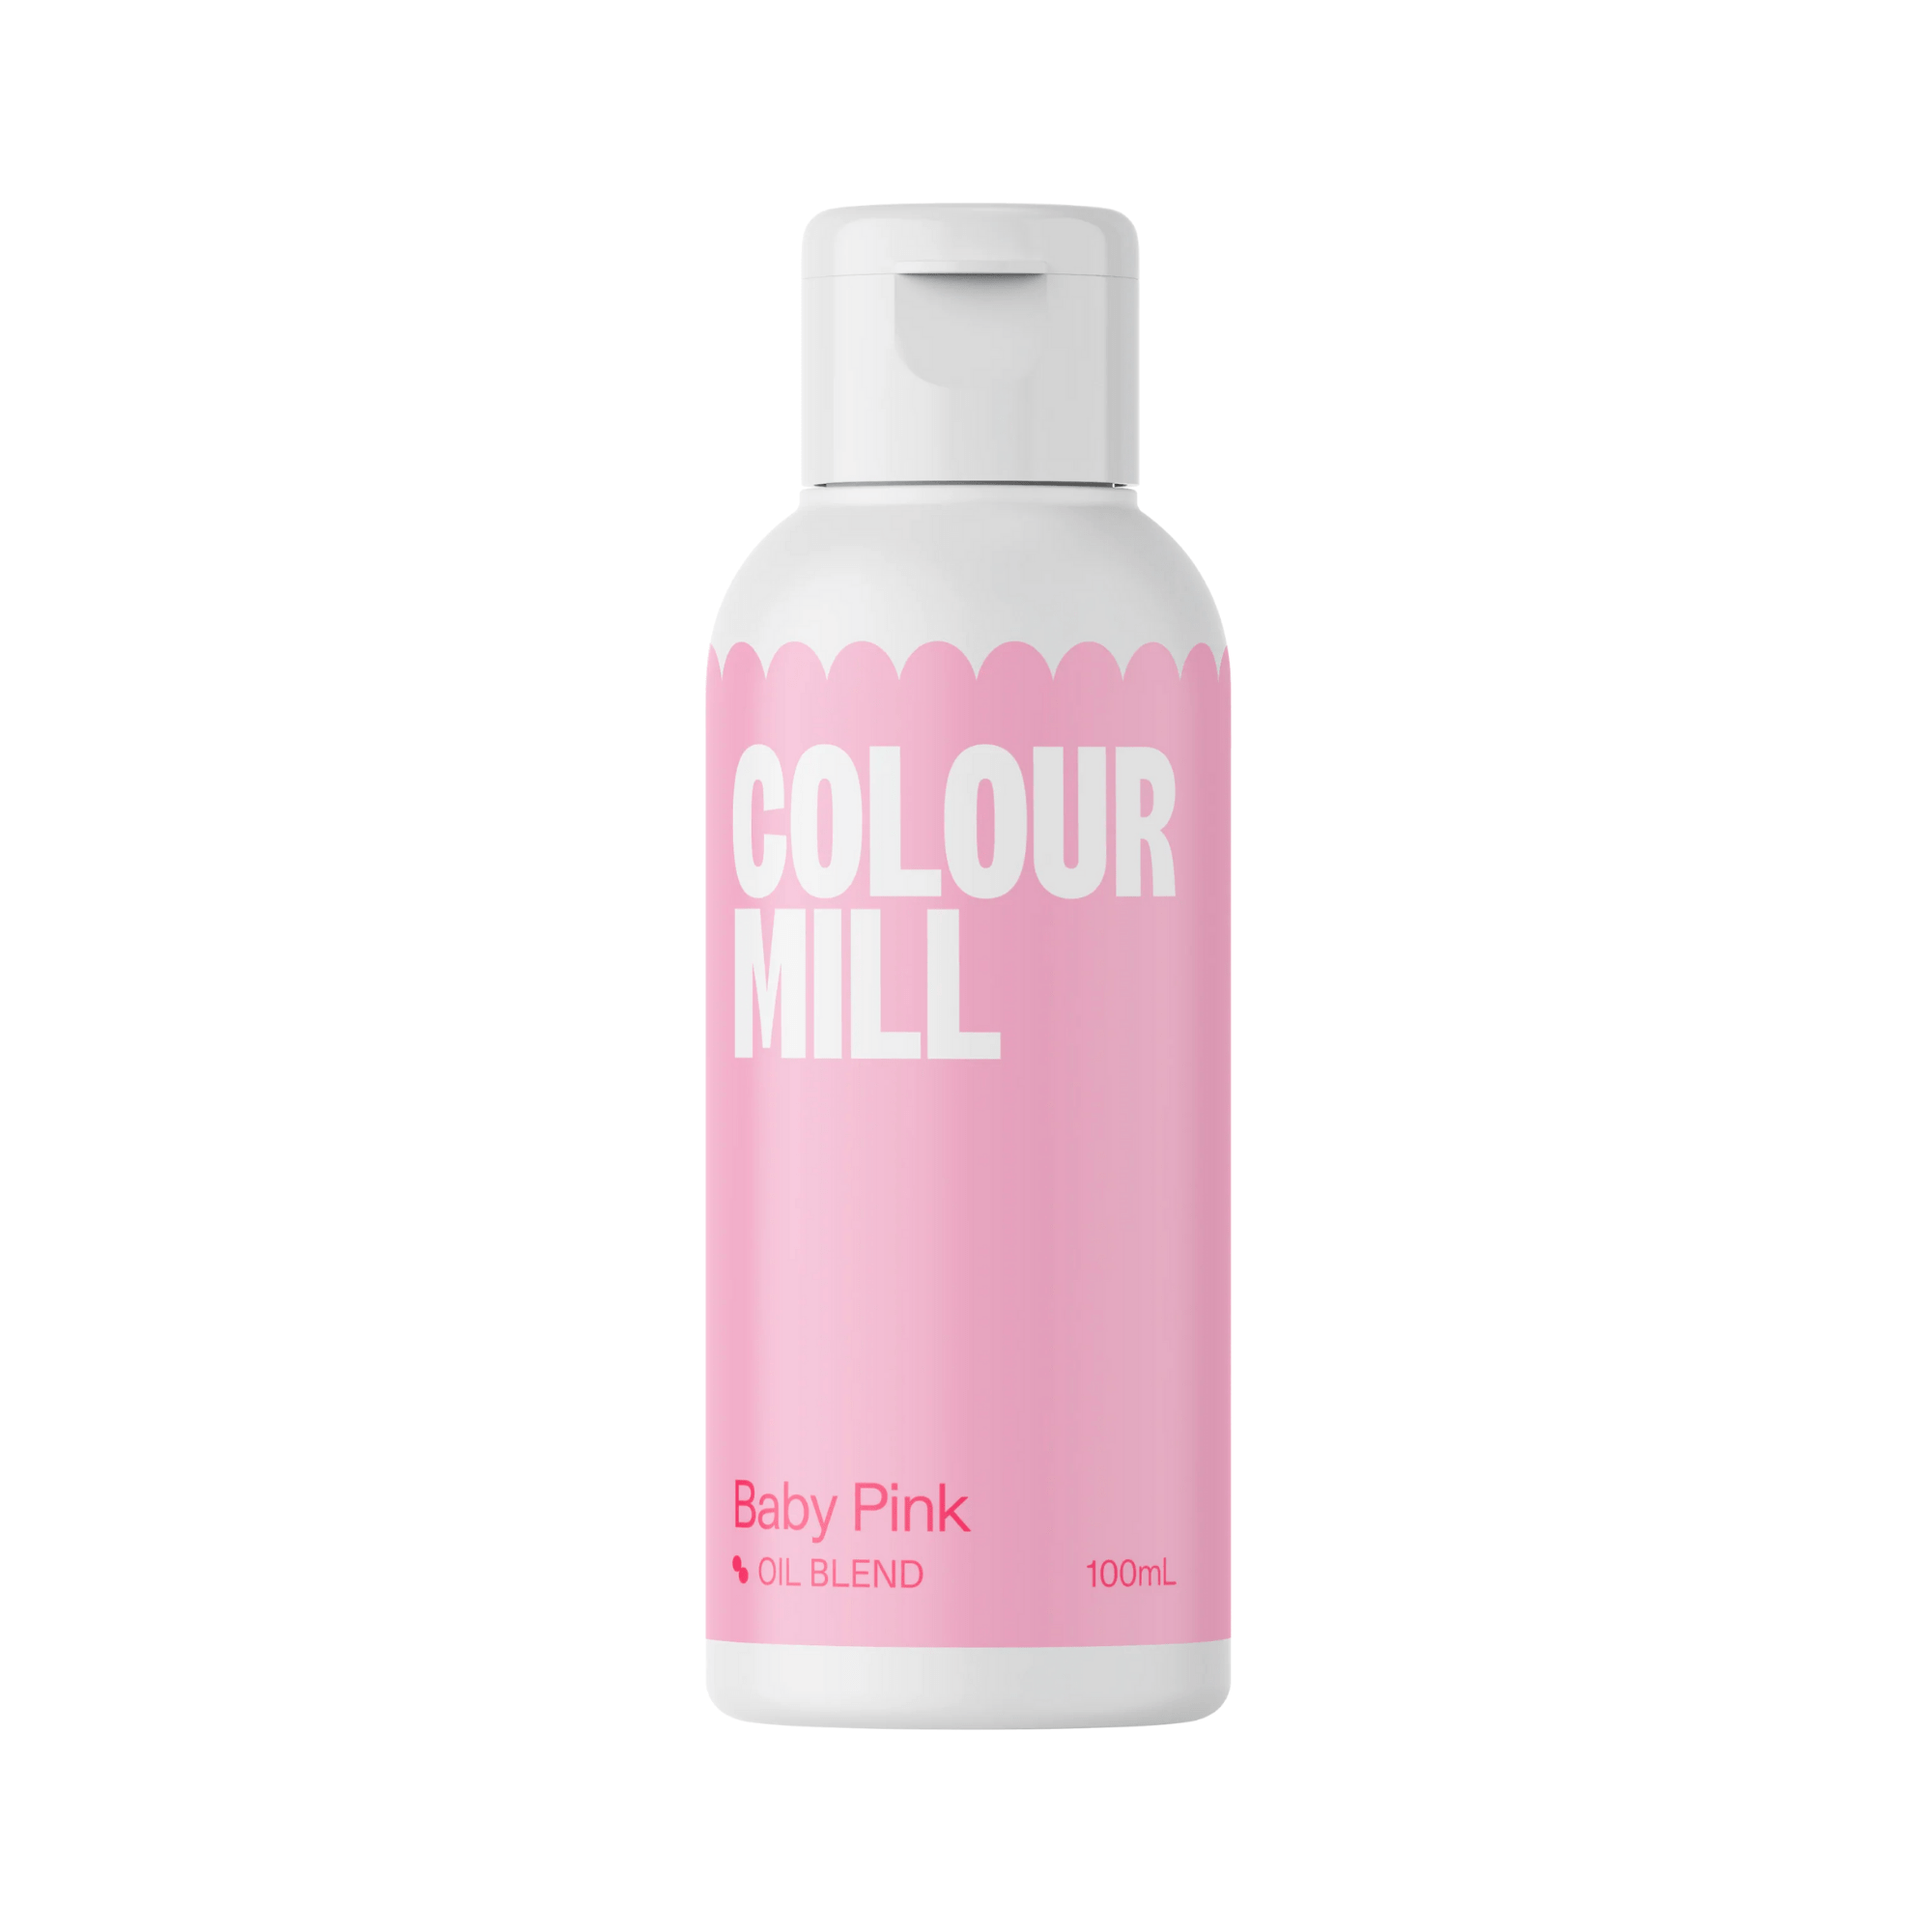 Happy Sprinkles Streusel 100ml Colour Mill Baby Pink - Oil Blend